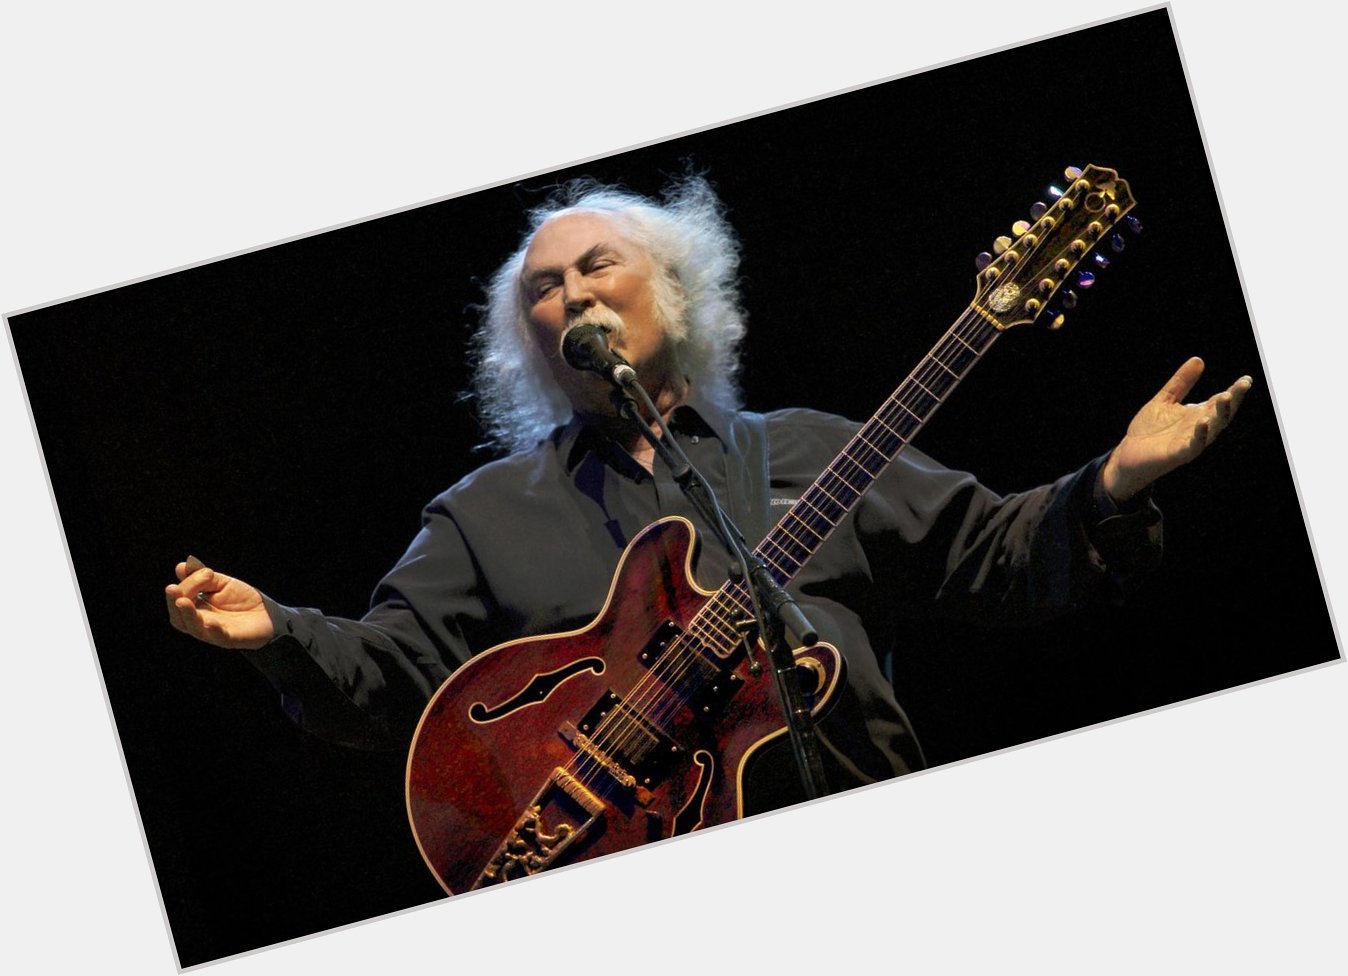 Happy Birthday to David Crosby, born this day in 1941 